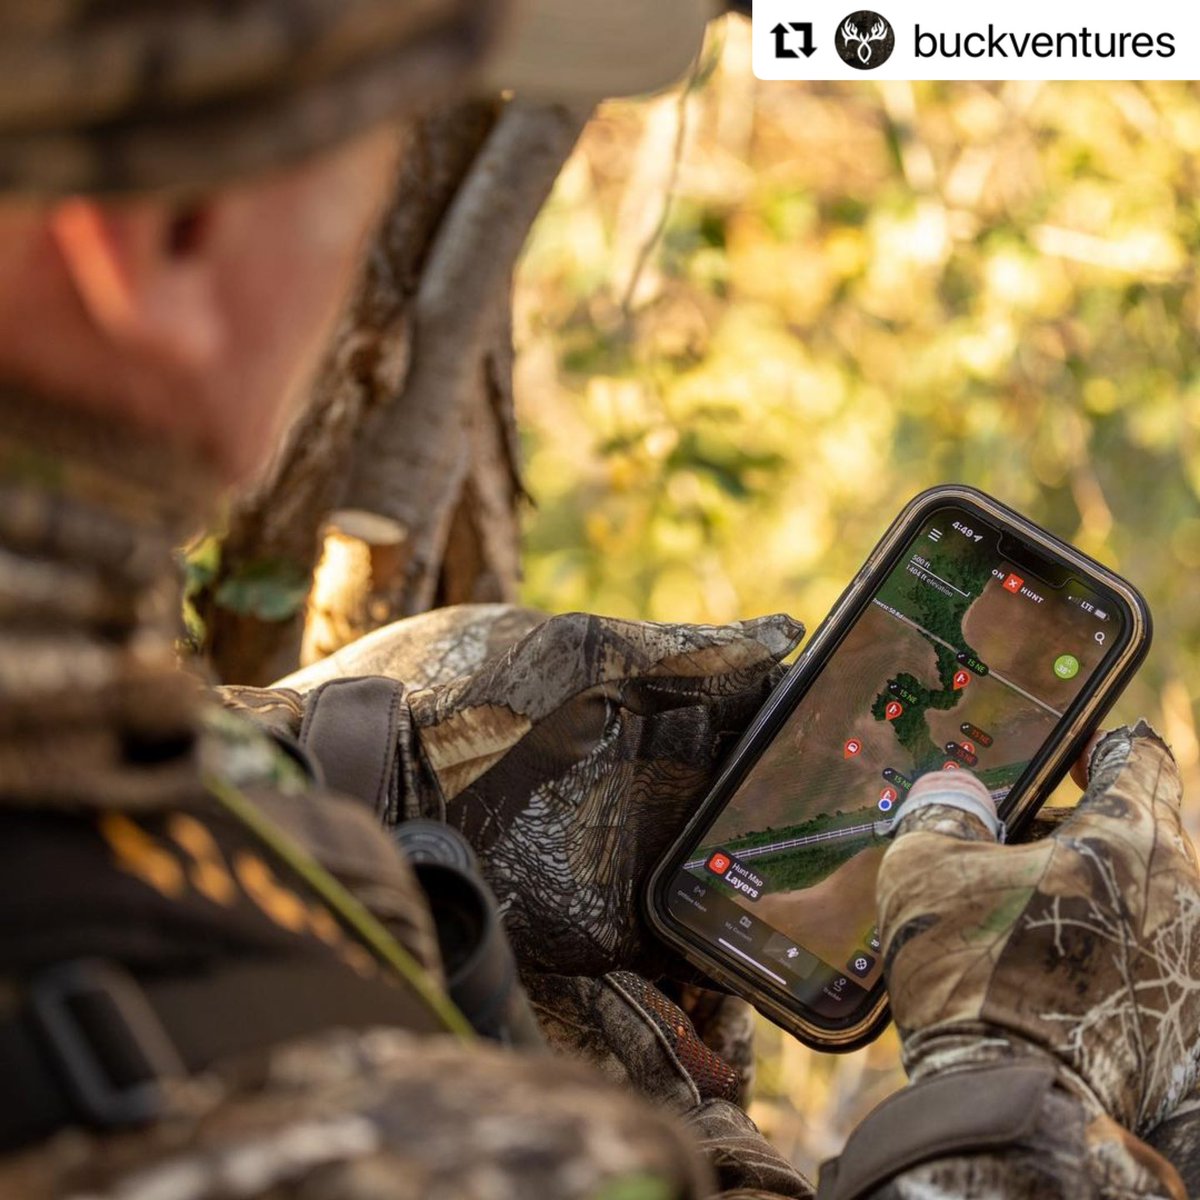 @onXmaps is a tool you can’t be without in the field! @Buckventures @DankerJeff @boom22cannon @SPORTSMANchnl #buckventures #onxmaps #iamsportsman